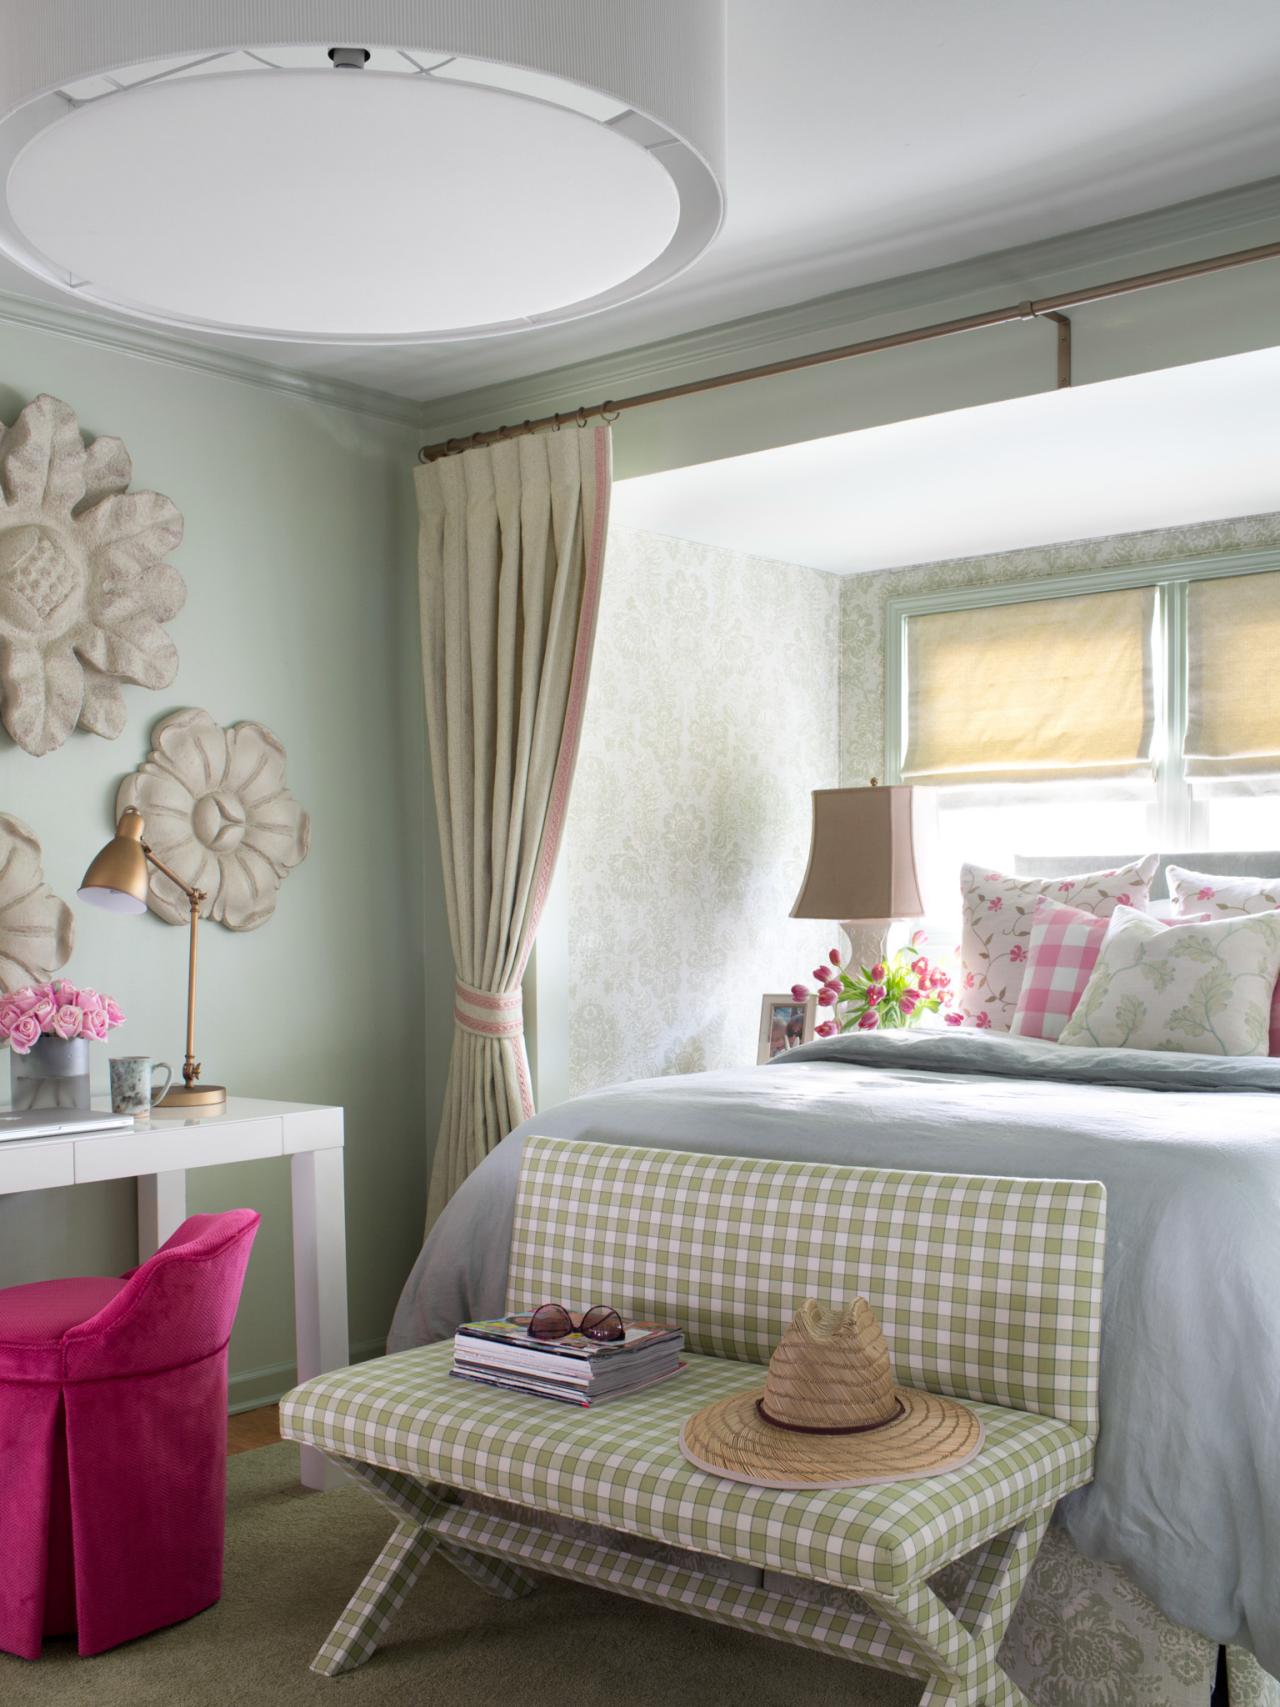 Mixing Patterns And Pastels: The Art Of Cottage Style Decor